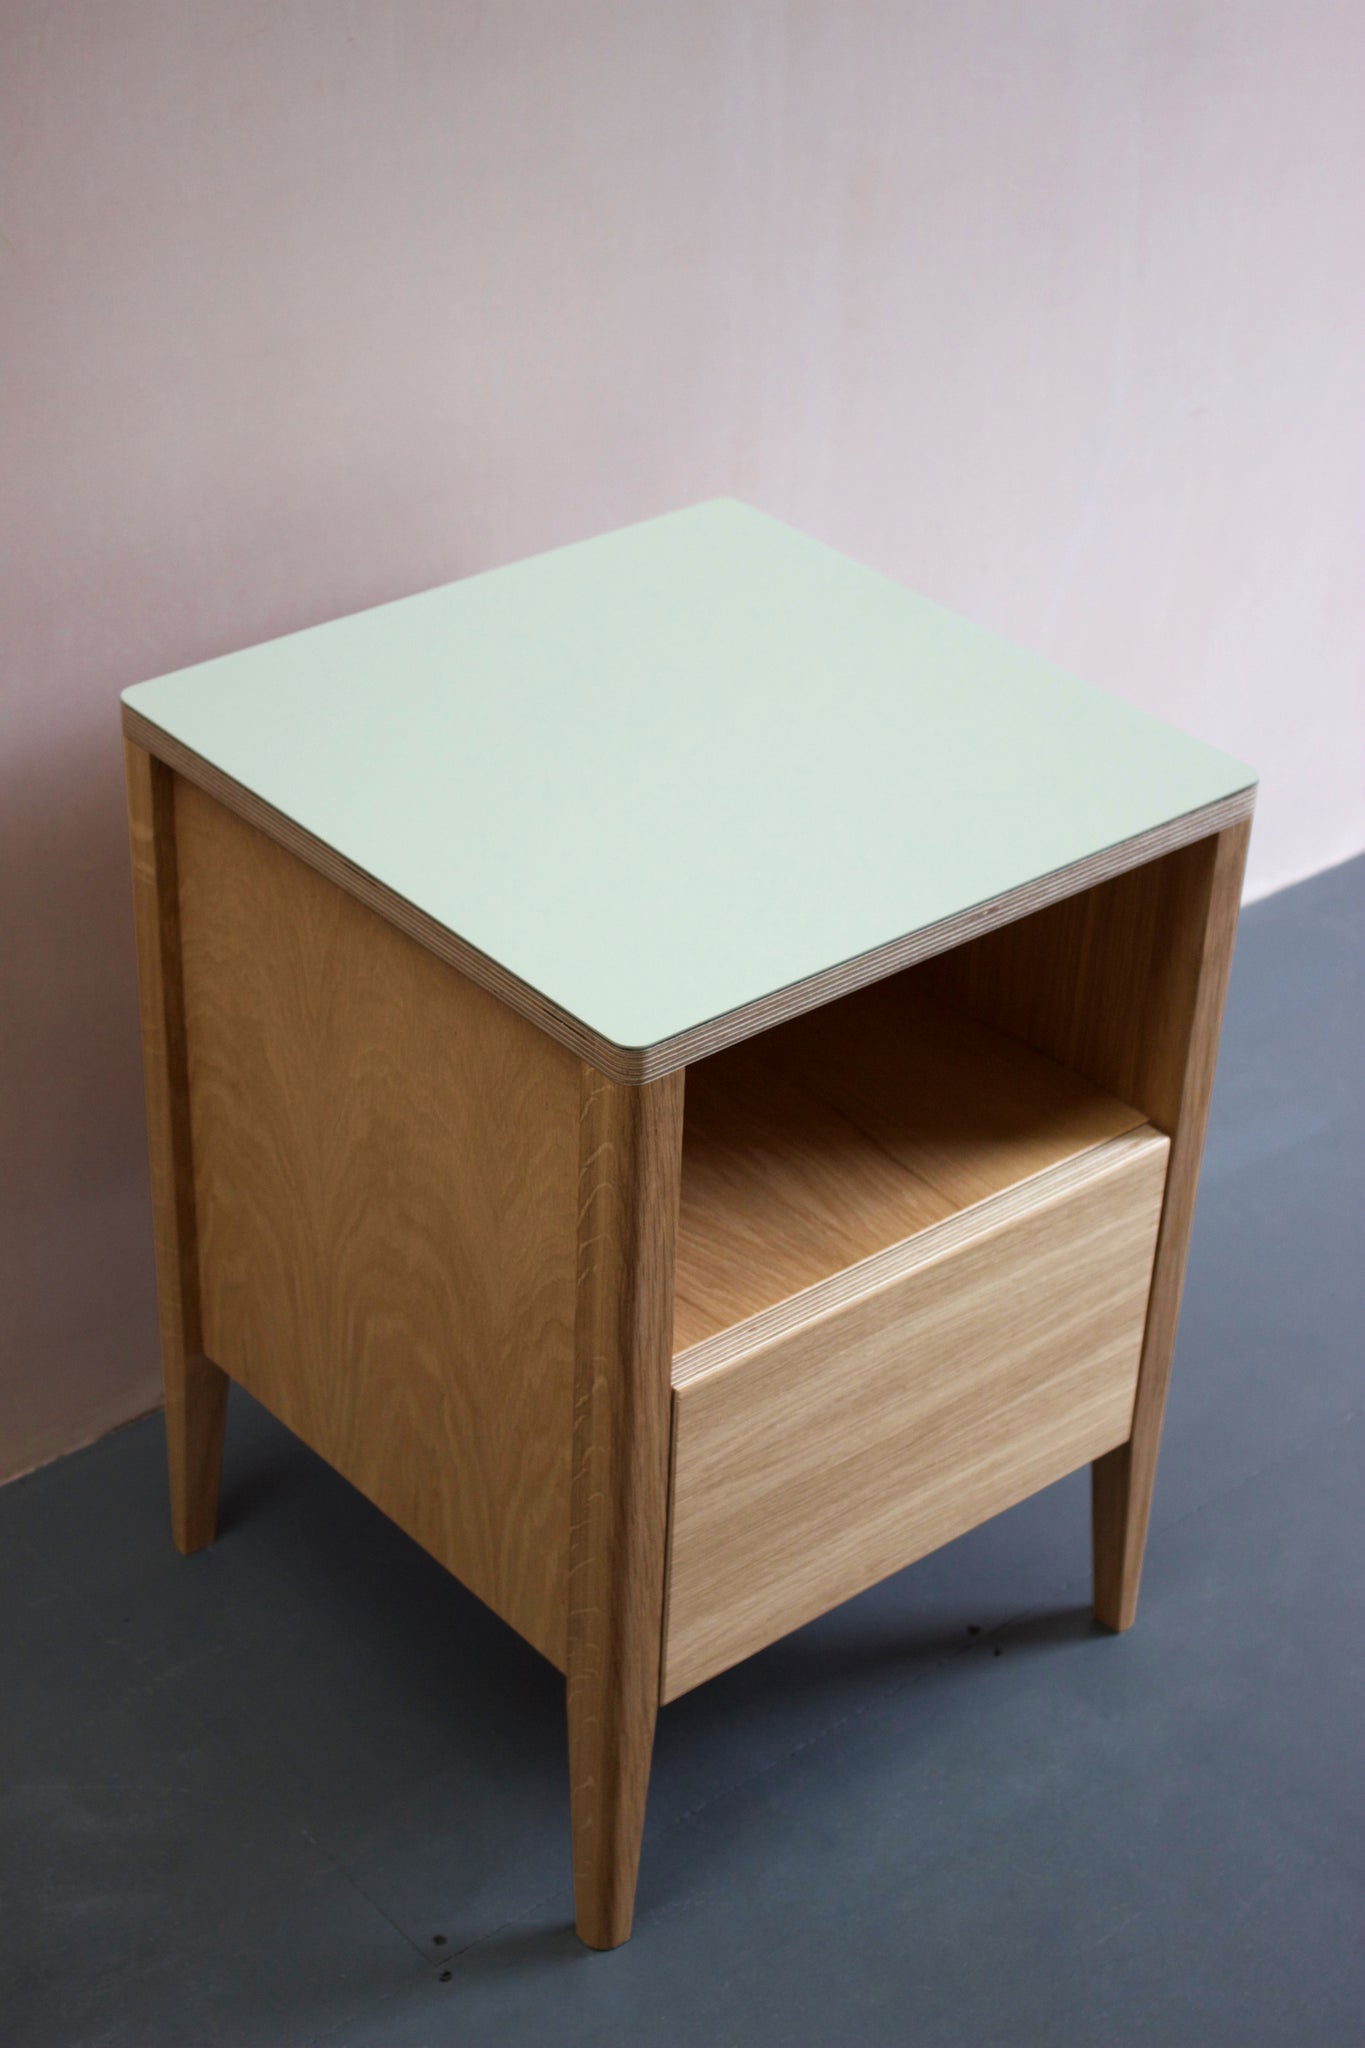 Handmade  bedside table, perfect for a modern home. It features Forbo linoleum top with oak veneered plywood and solid oak legs. Made by Jon Grant London in Leyton, East London.